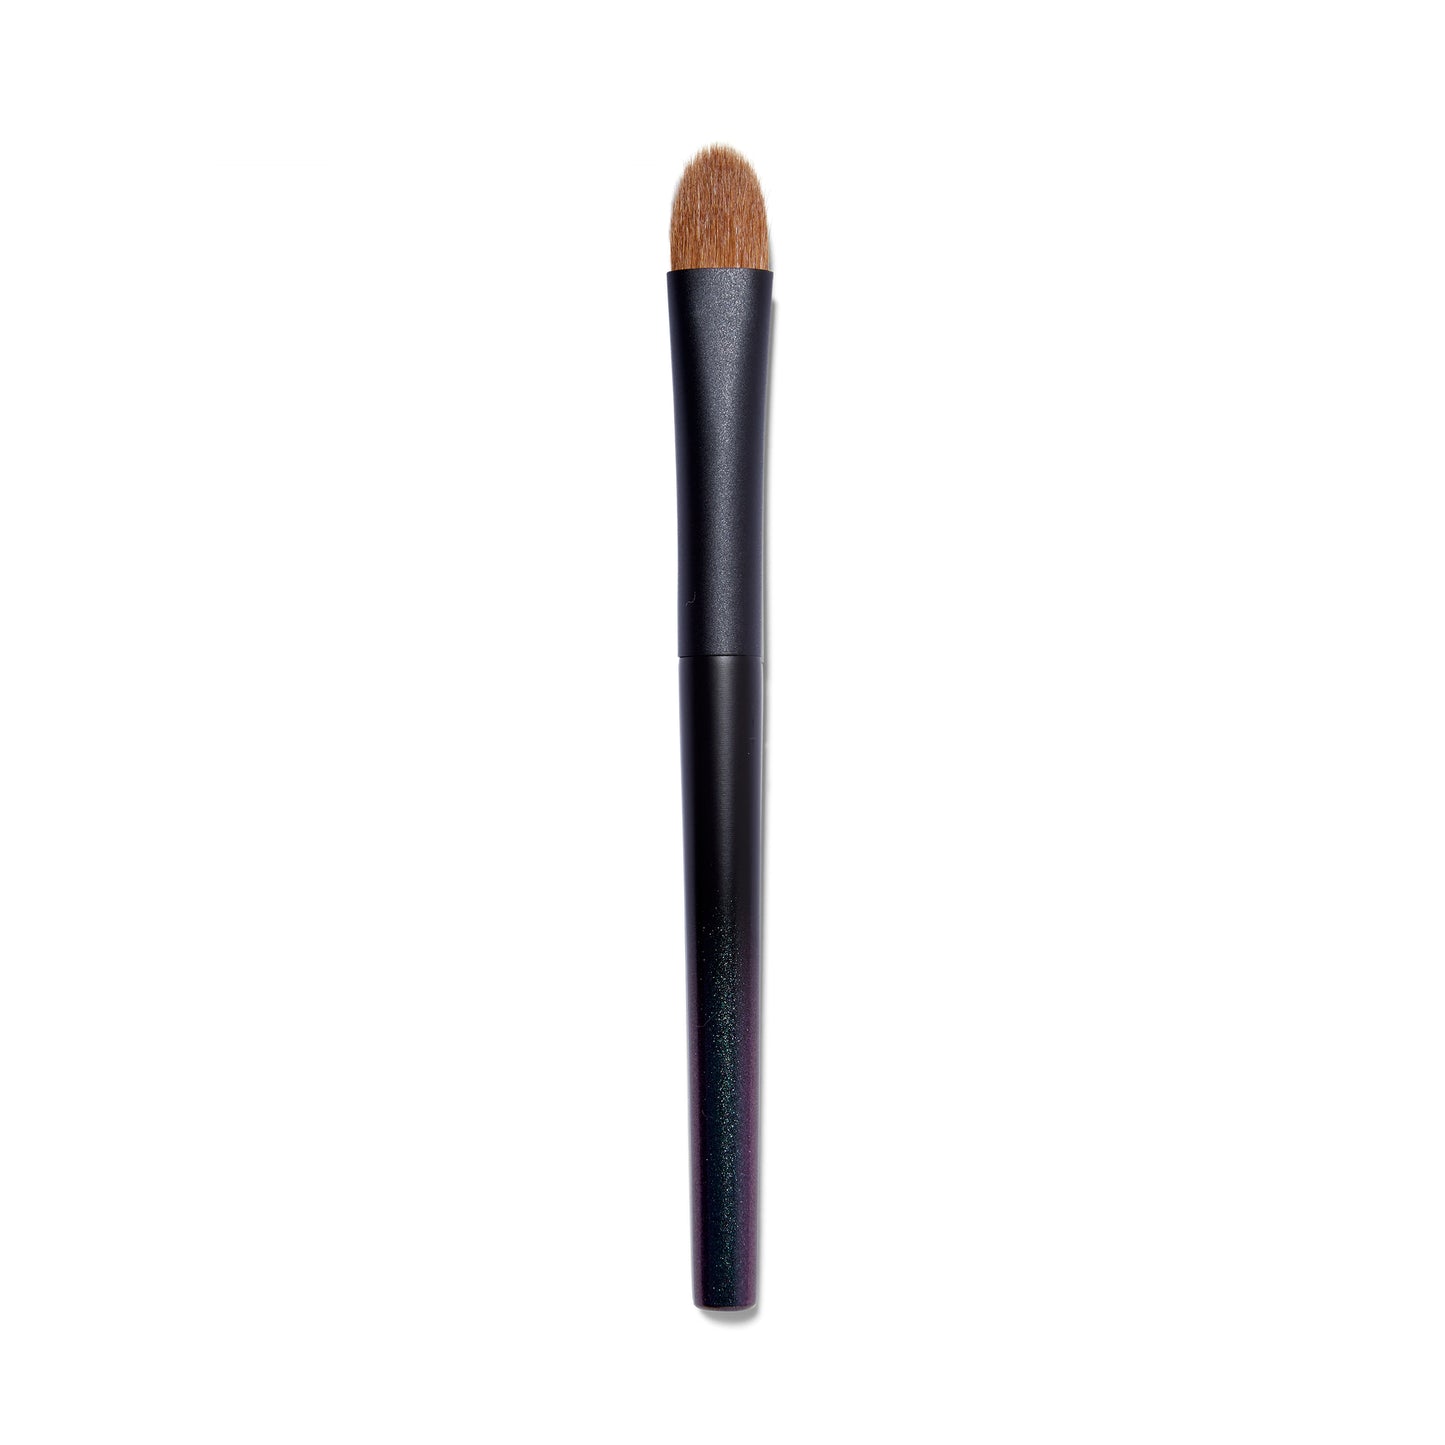 Full view of the Surratt Perfectionniste Complexion brush. The handle is black with subtle purple shimmer. The natural bristles are brown and in a soft curved taper. 